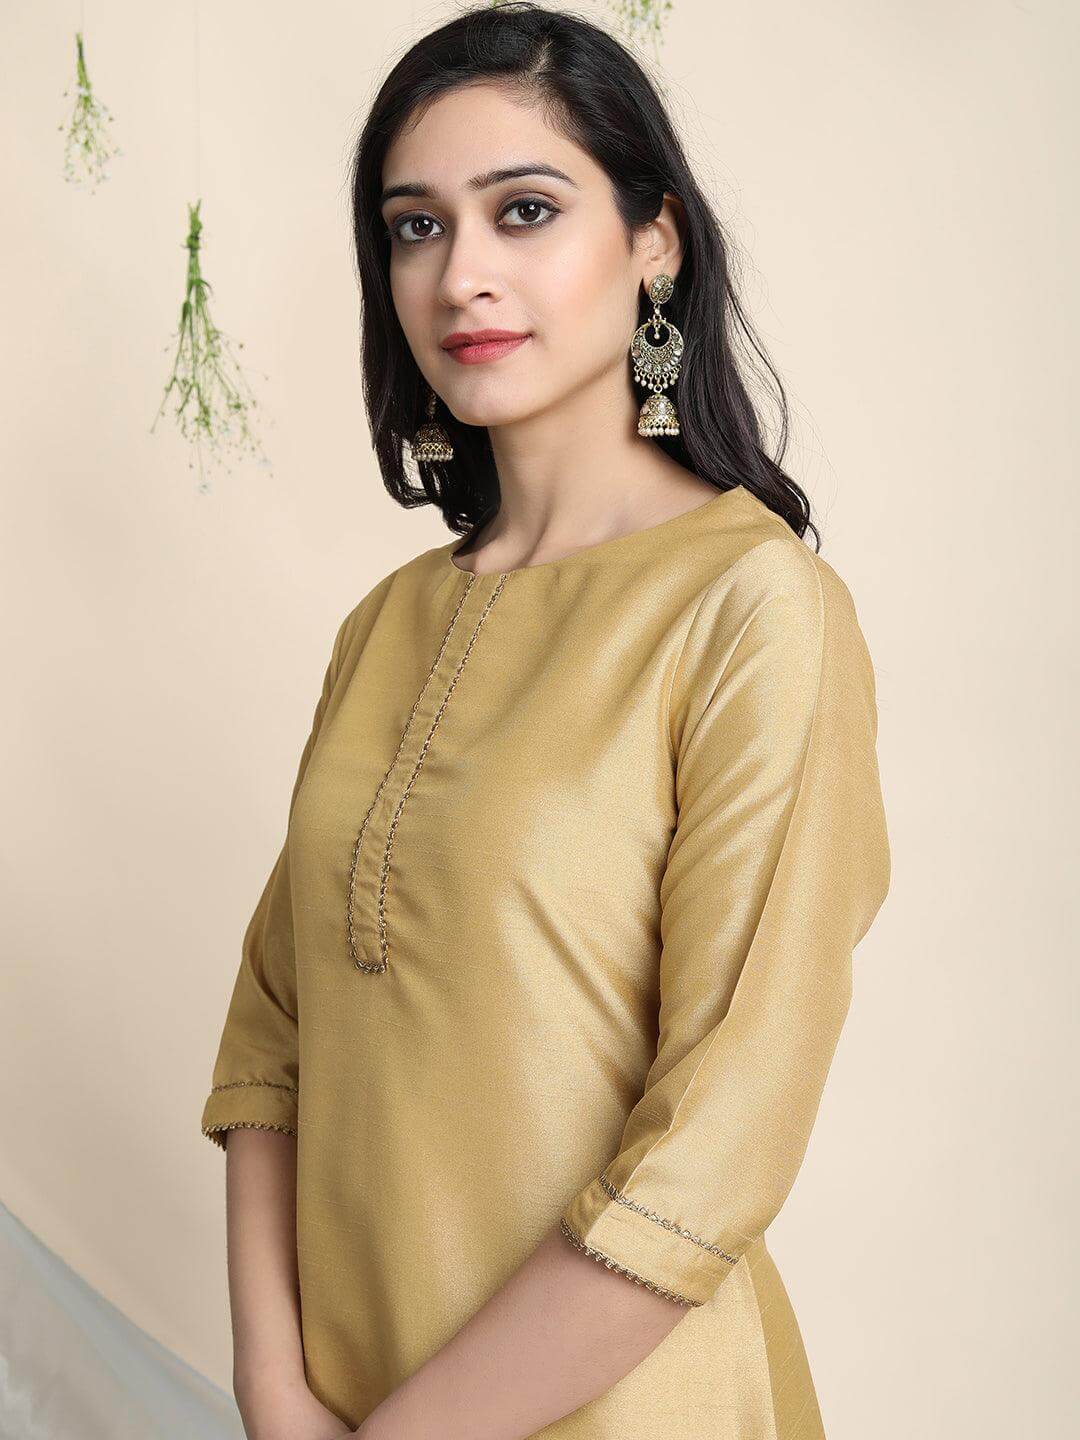 Ft Gold Style Long Kurti Collection, this catalog fabric is rayon,